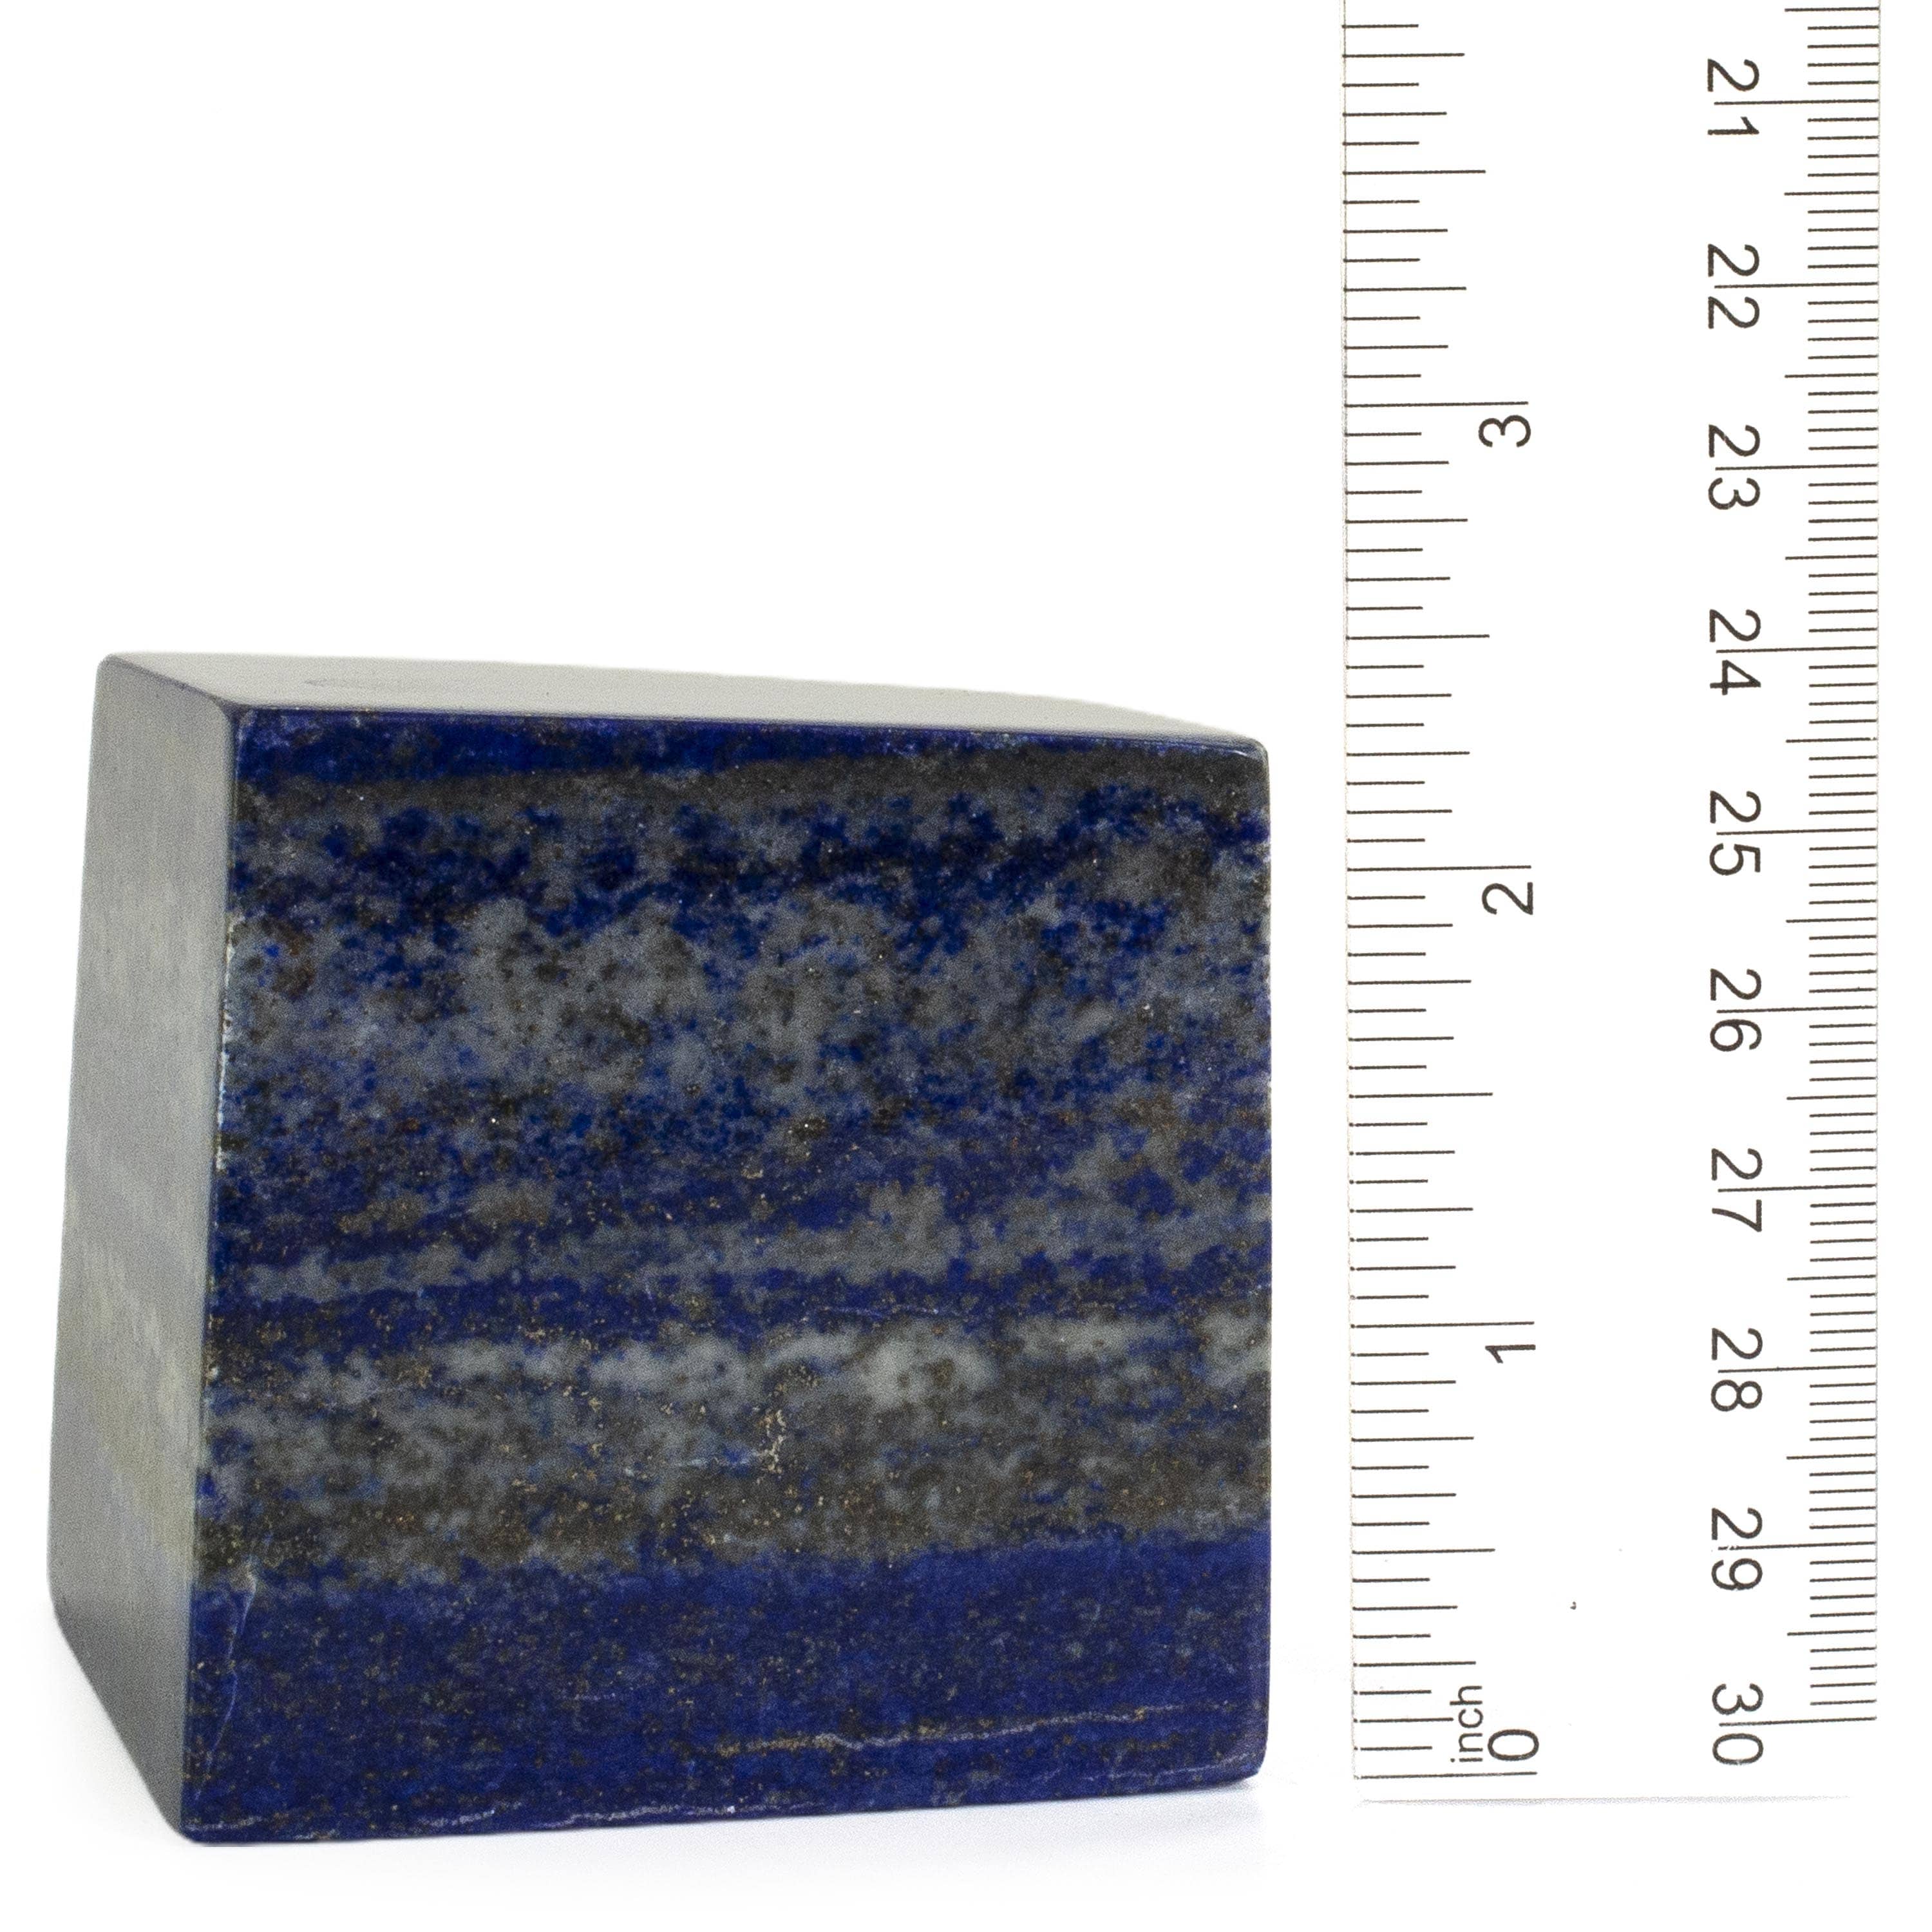 Kalifano Lapis Lapis Lazuil Freeform from Afghanistan - 605 g / 1.3 lbs LP700.002